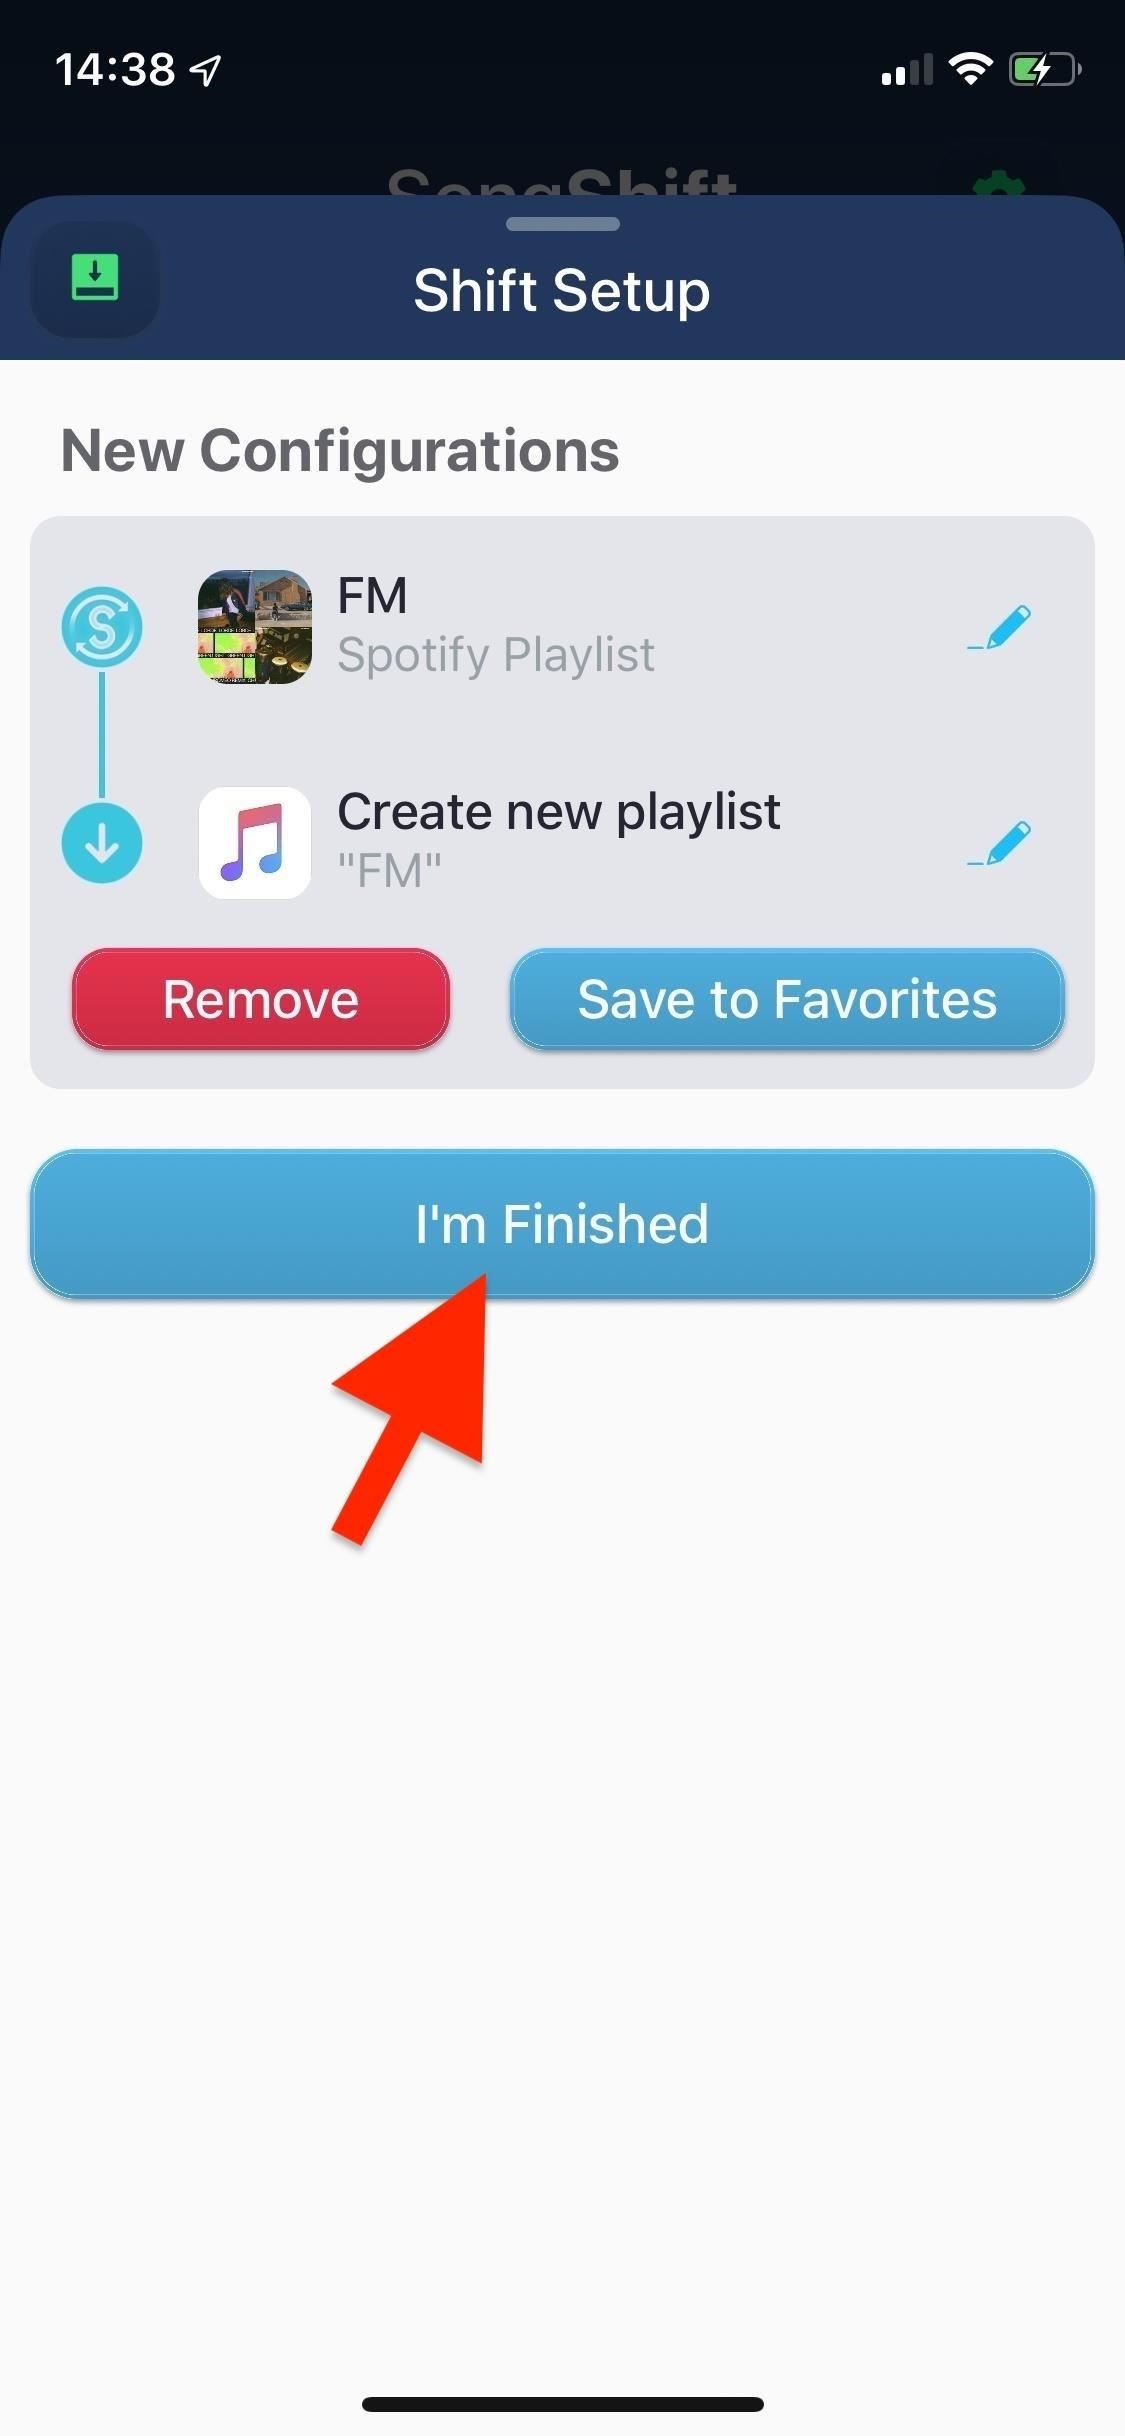 How to Transfer Your Spotify Playlists to Apple Music from an iPhone or Android Phone